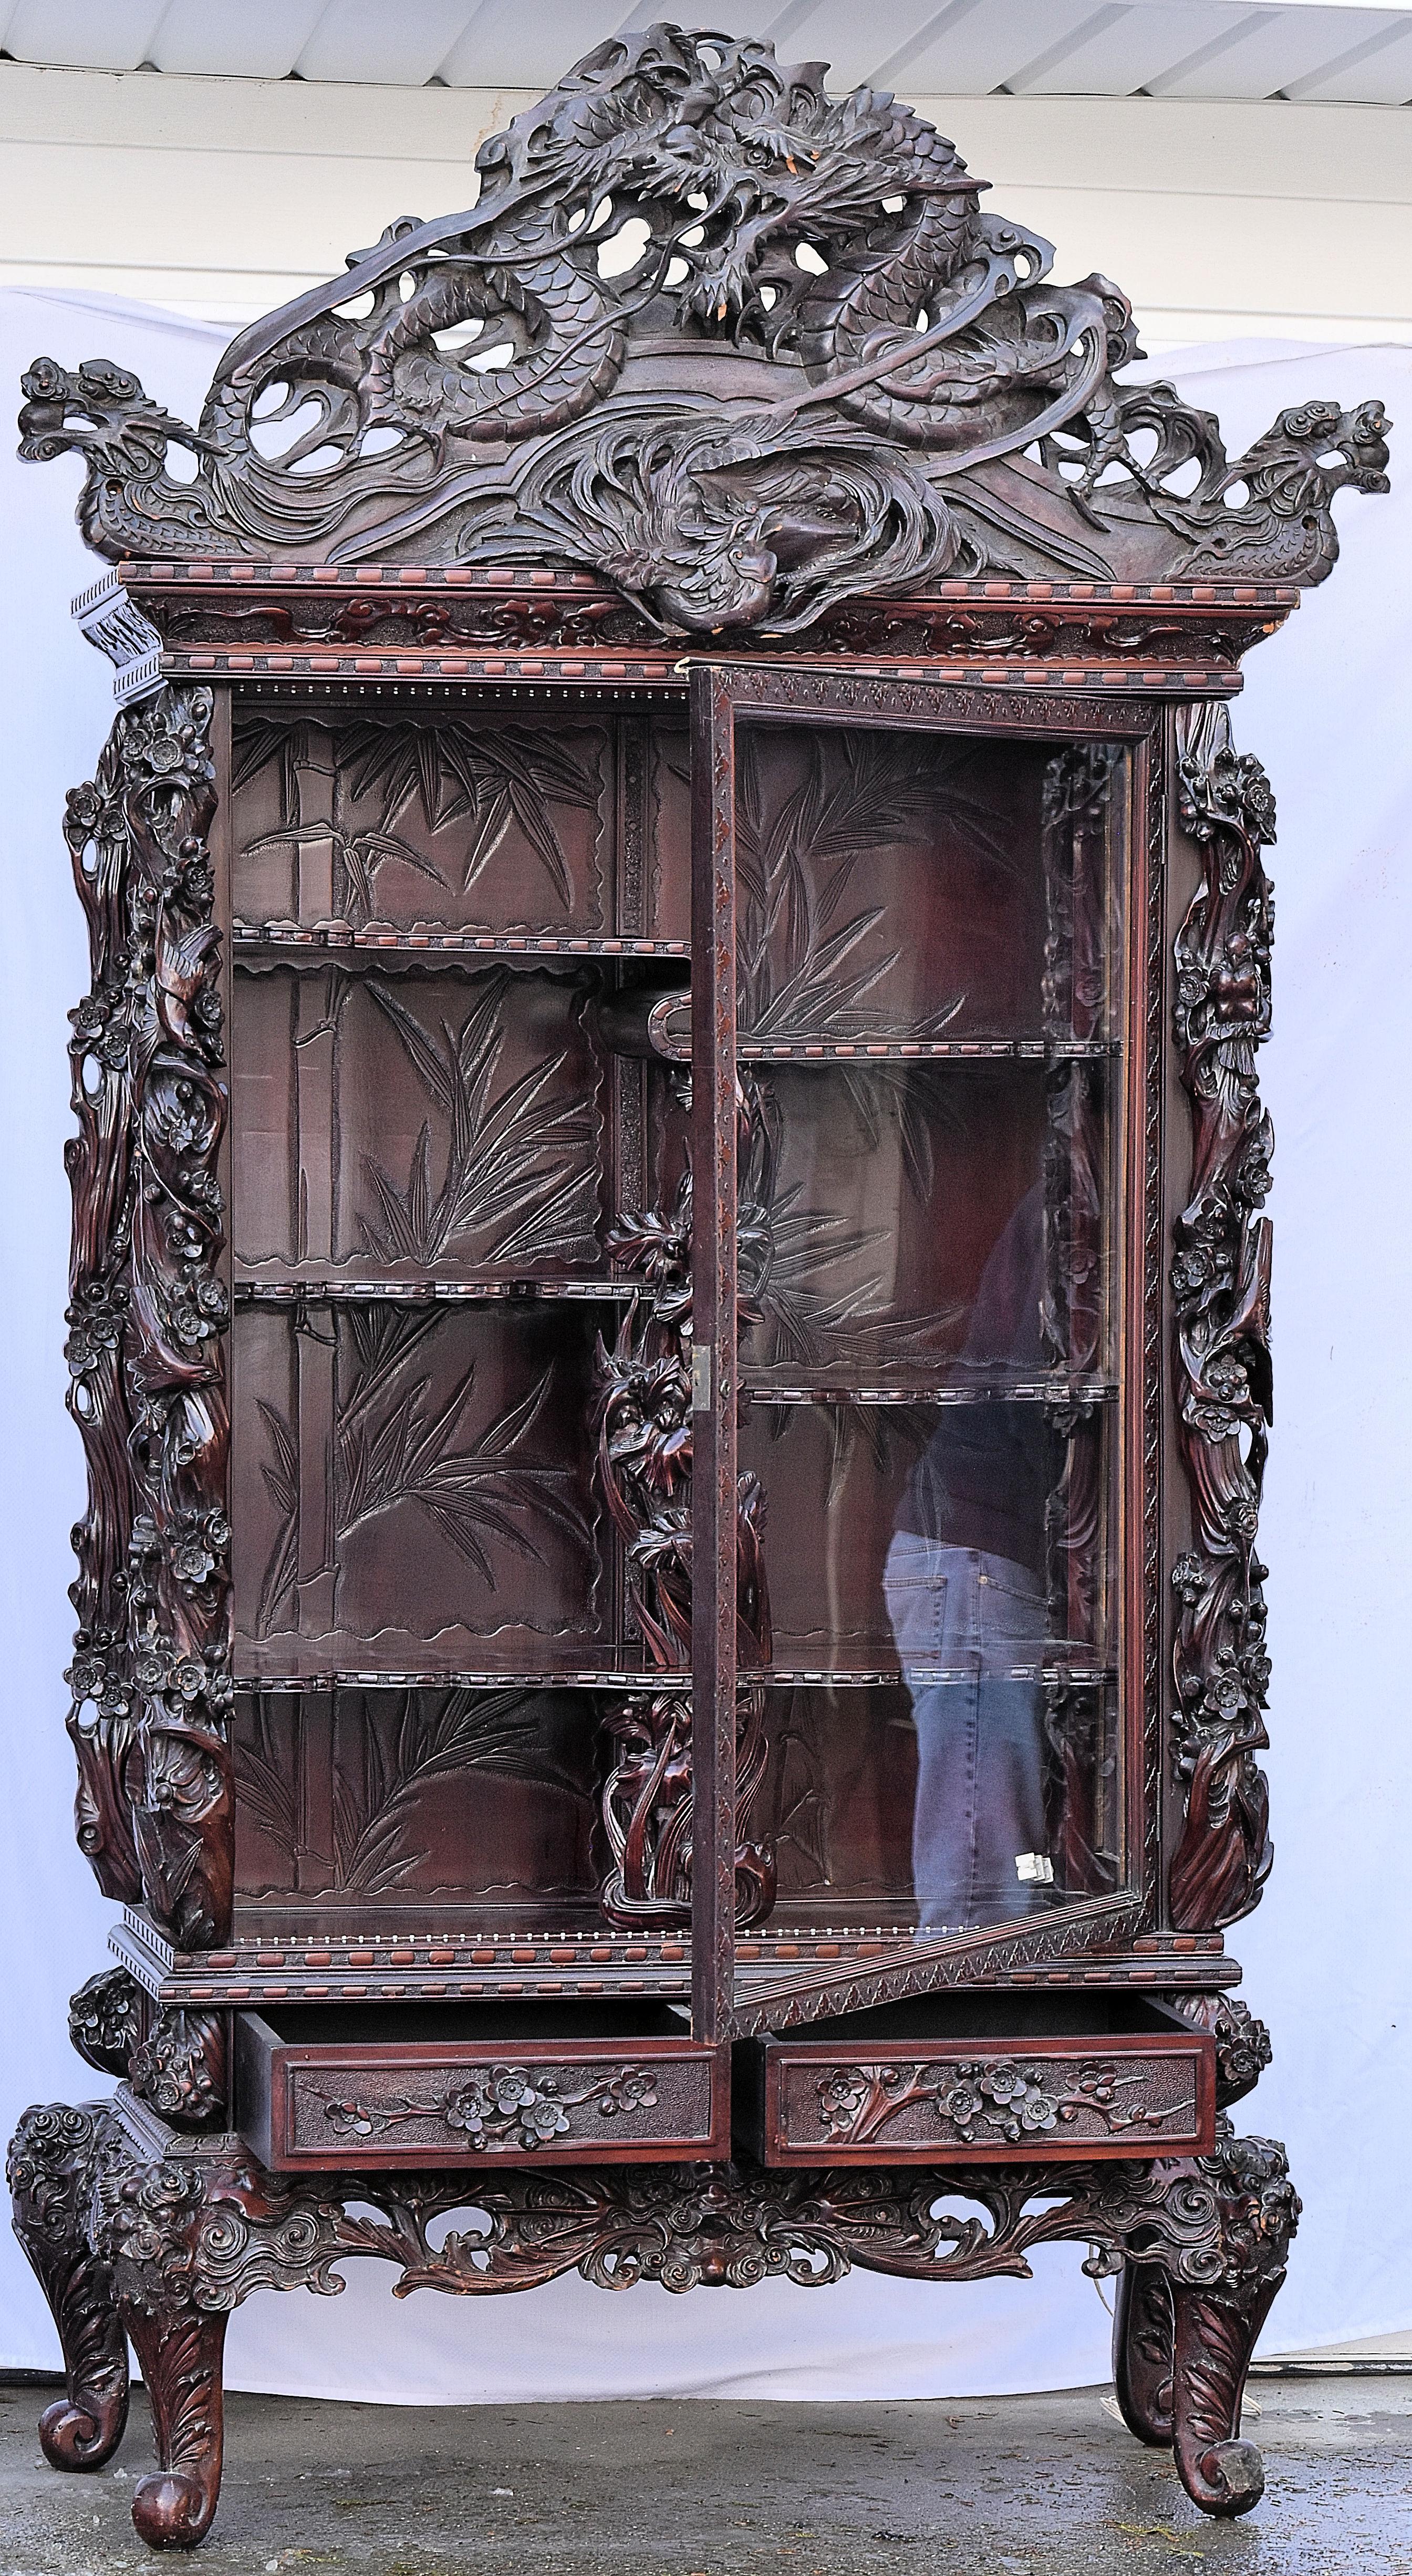 Heavily carved Japnese display cabinet featuring multiple dragons, top to bottom. The cabinet features a single, large glass door with 6 shelves inside and two drawers underneath.

The cabinet and base come apart for easy moving.

Showcase
Overall